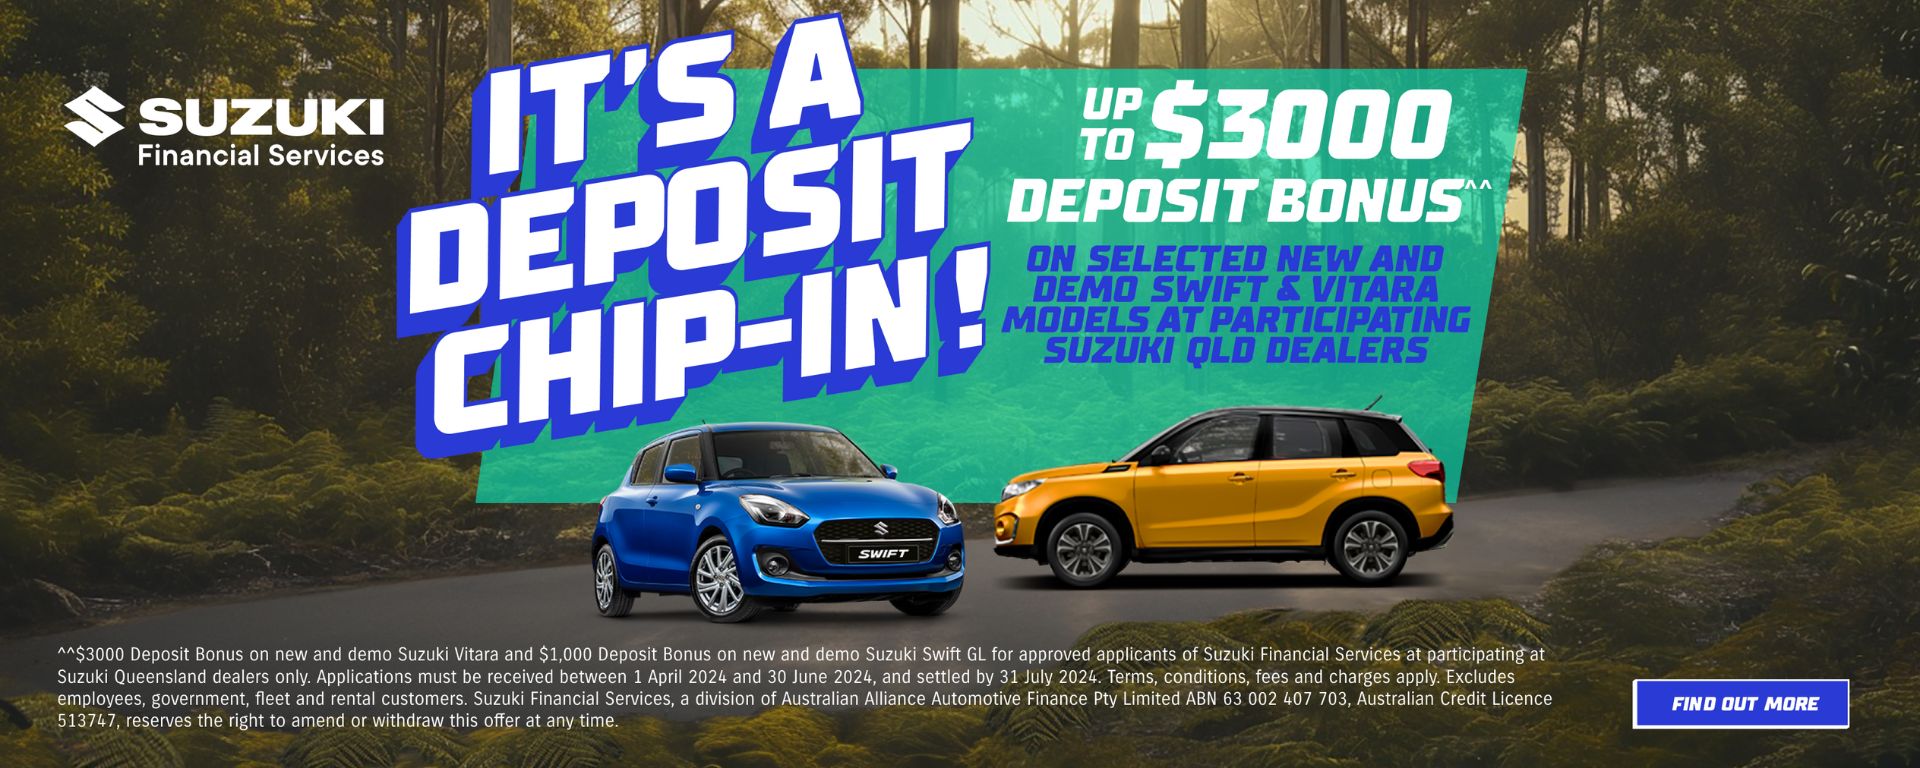 It's a deposit chip in! Up to $3000 deposit bonus on selected New and Demo Swift & Vitara models.